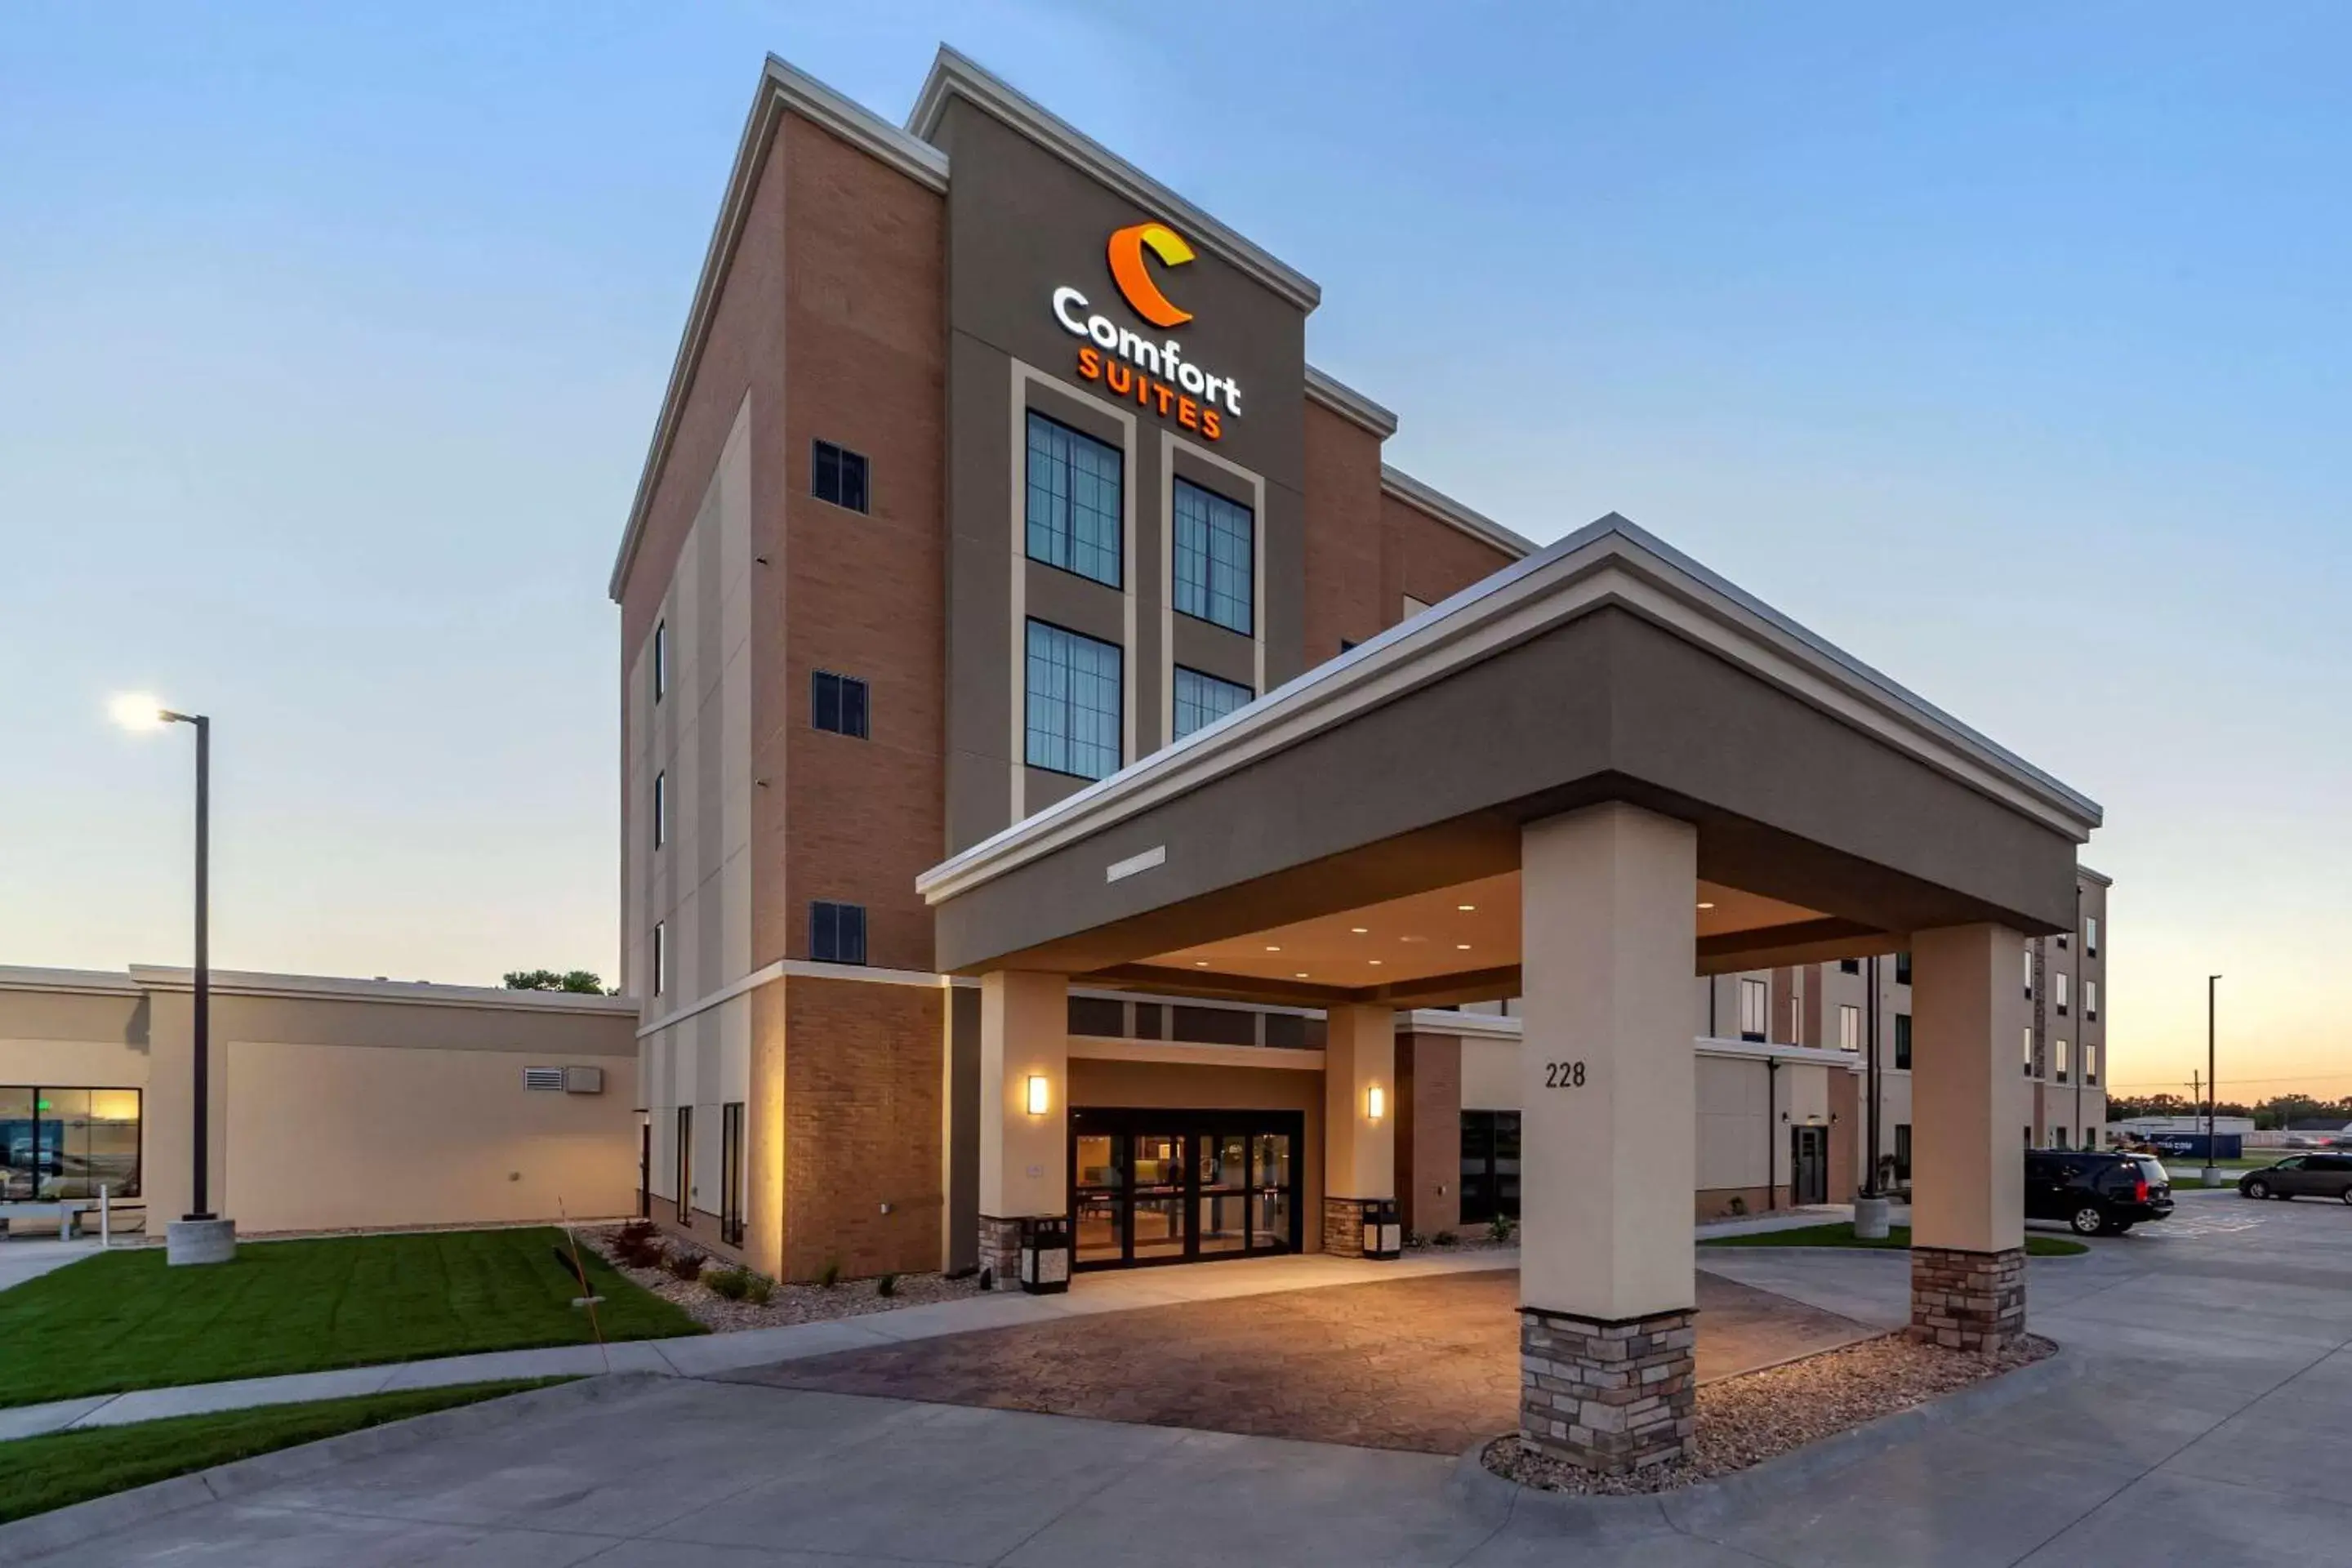 Other, Property Building in Comfort Suites Grand Island